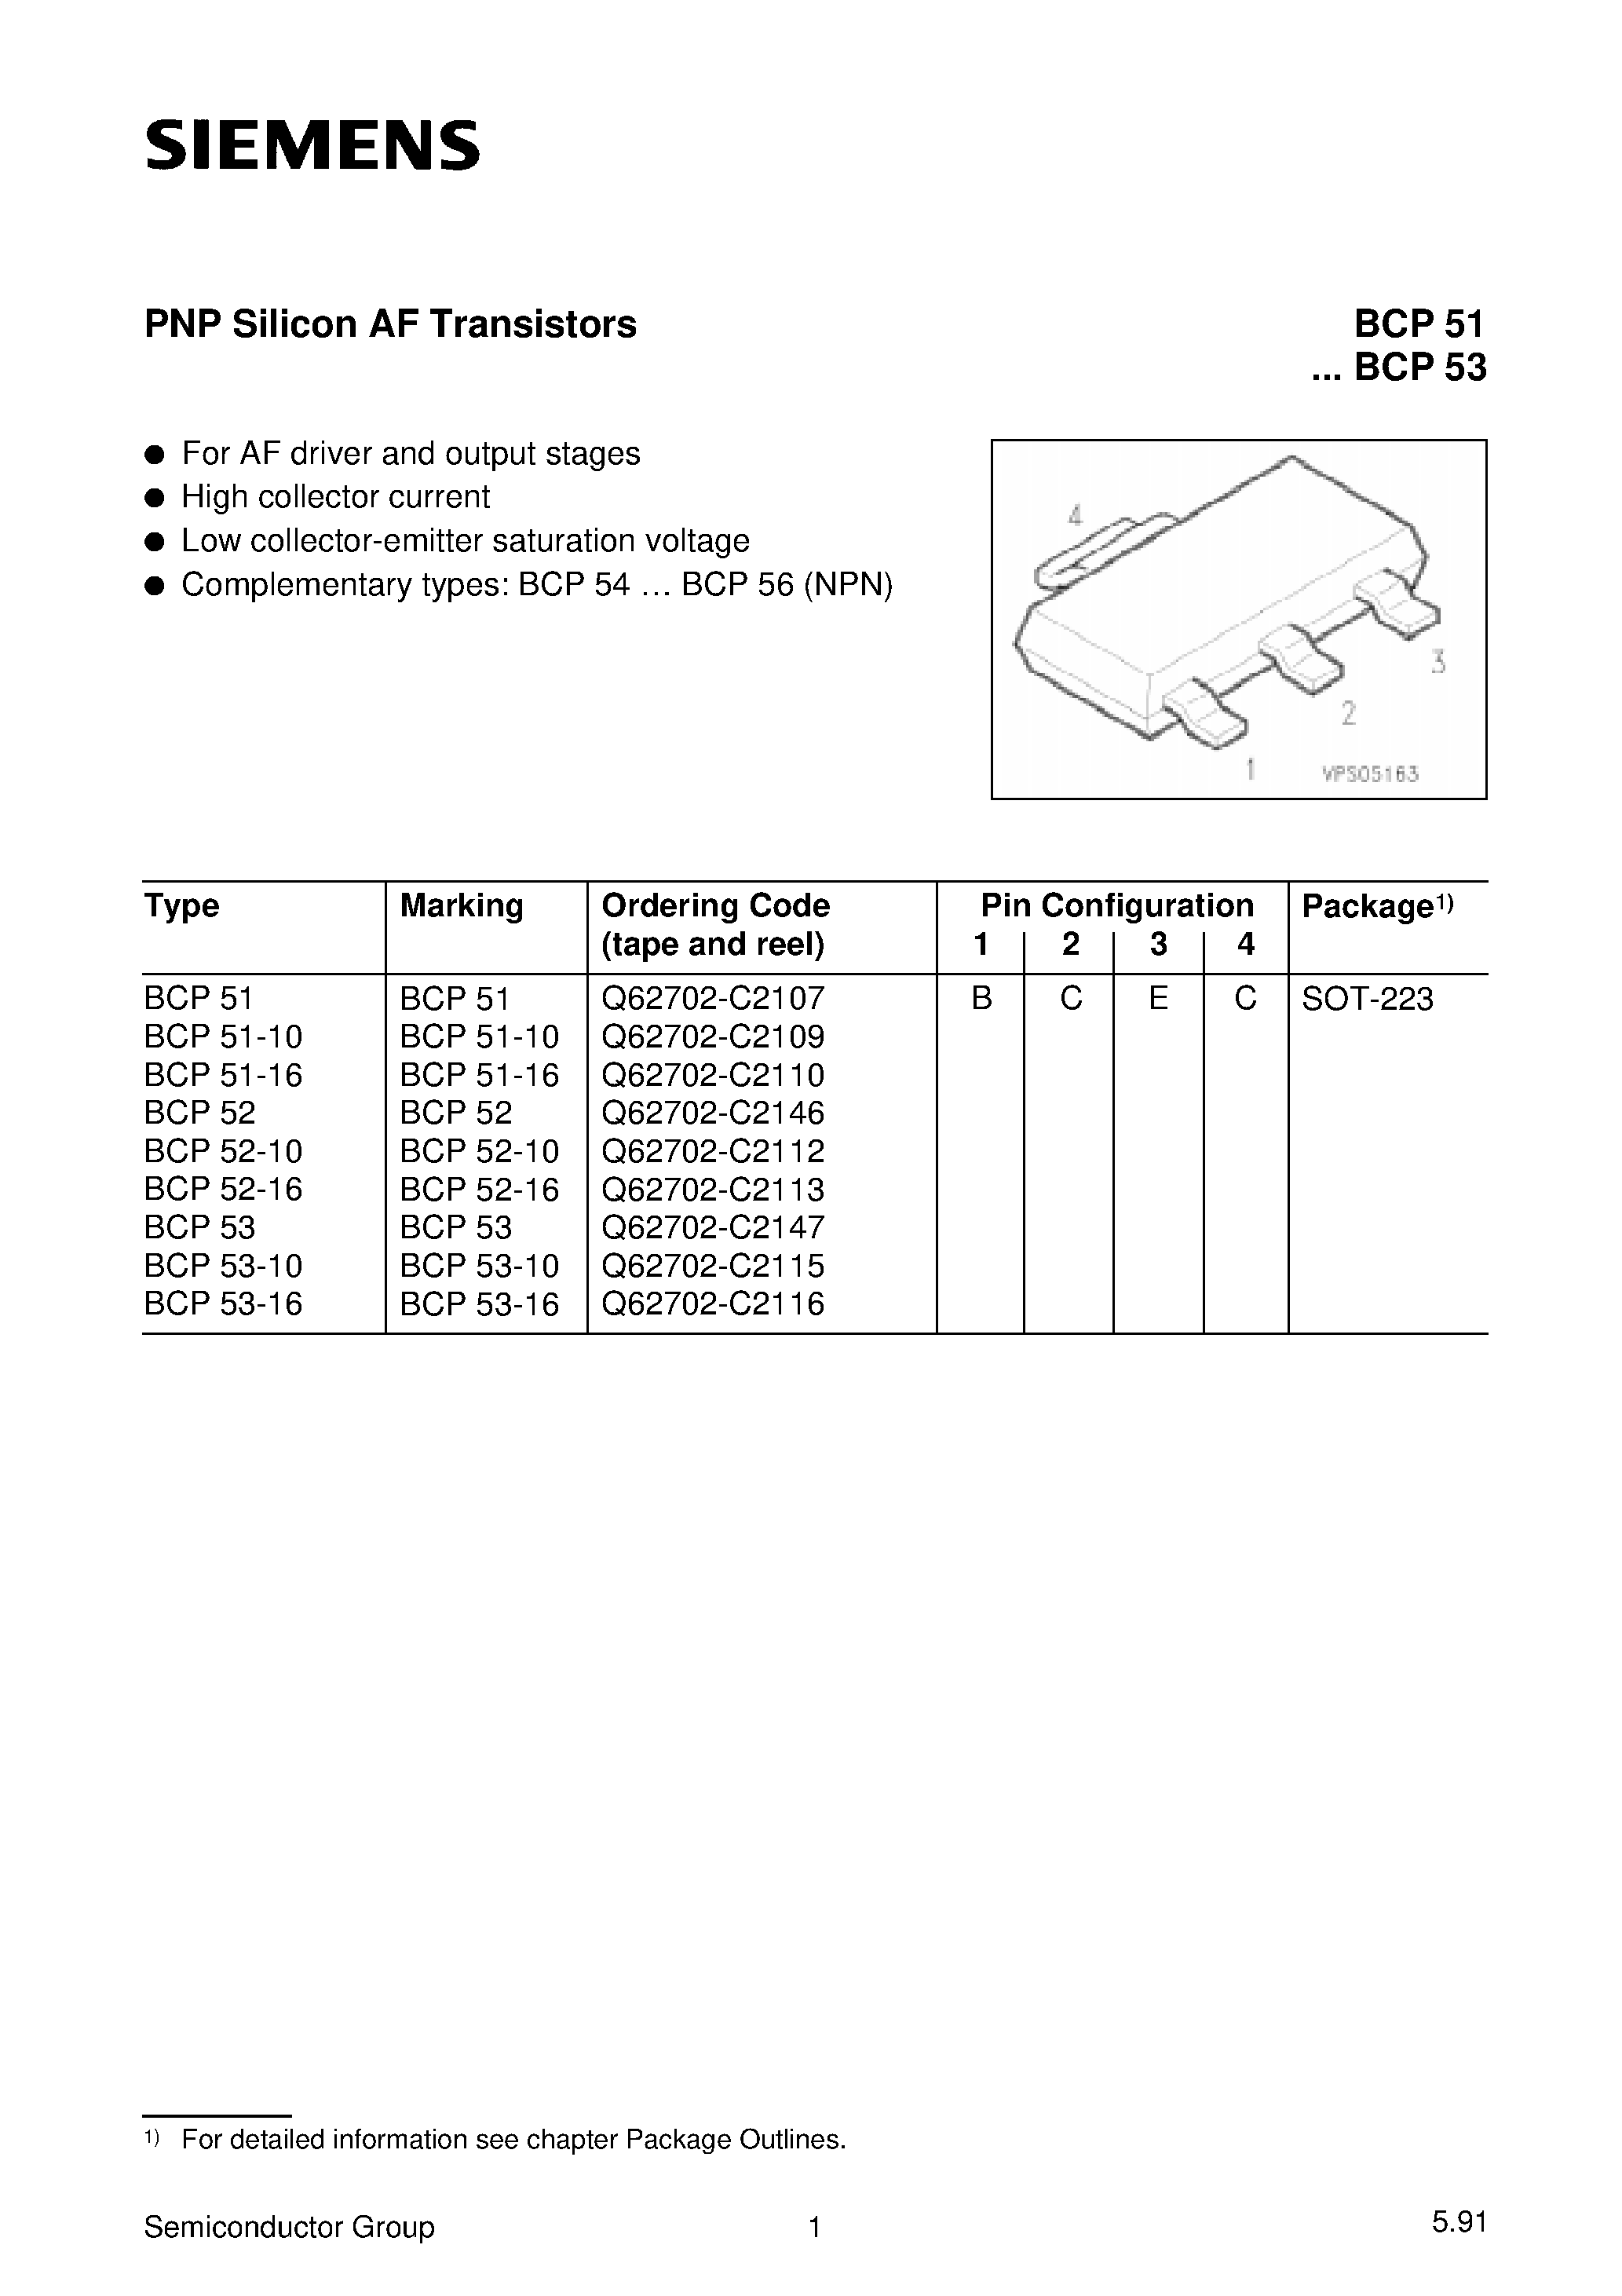 Datasheet BCP51-10 - PNP Silicon AF Transistors (For AF driver and output stages High collector current) page 1